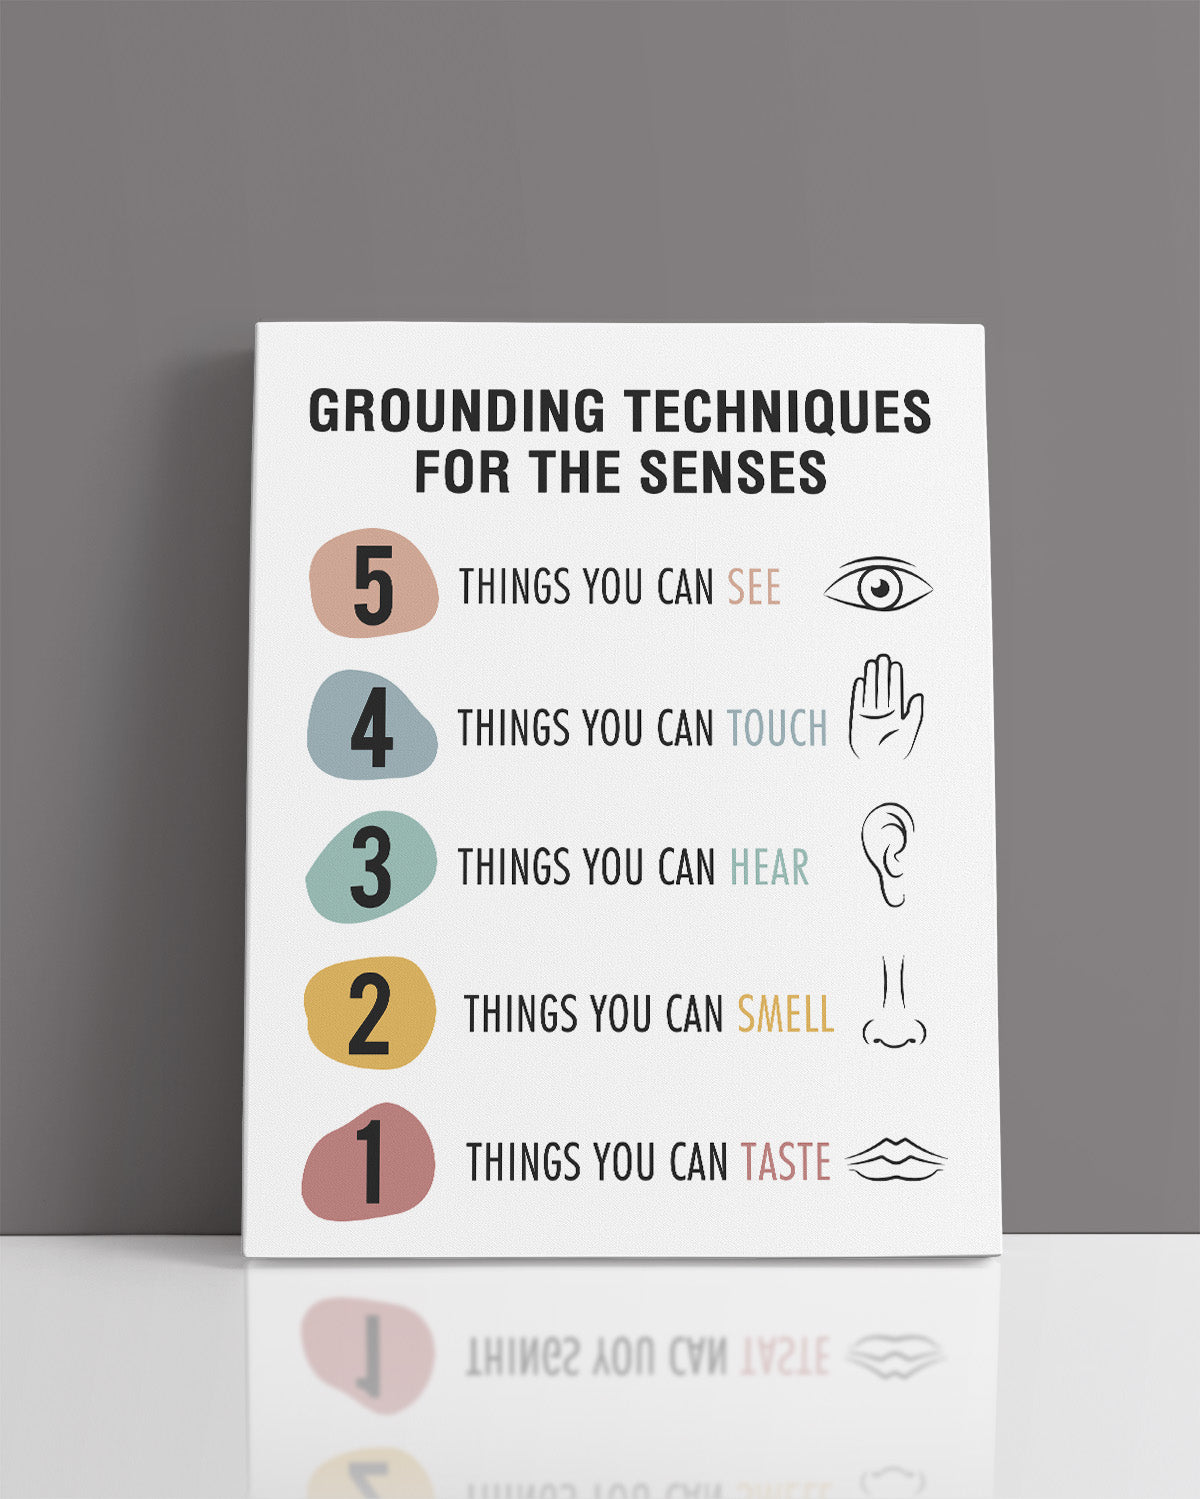 Grounding Techniques for the Senses - Wall Decor for Therapy Office - Mindfulness Wall Decor - Counseling Office - Mental Health Wall Art - School Psychologist, Therapist